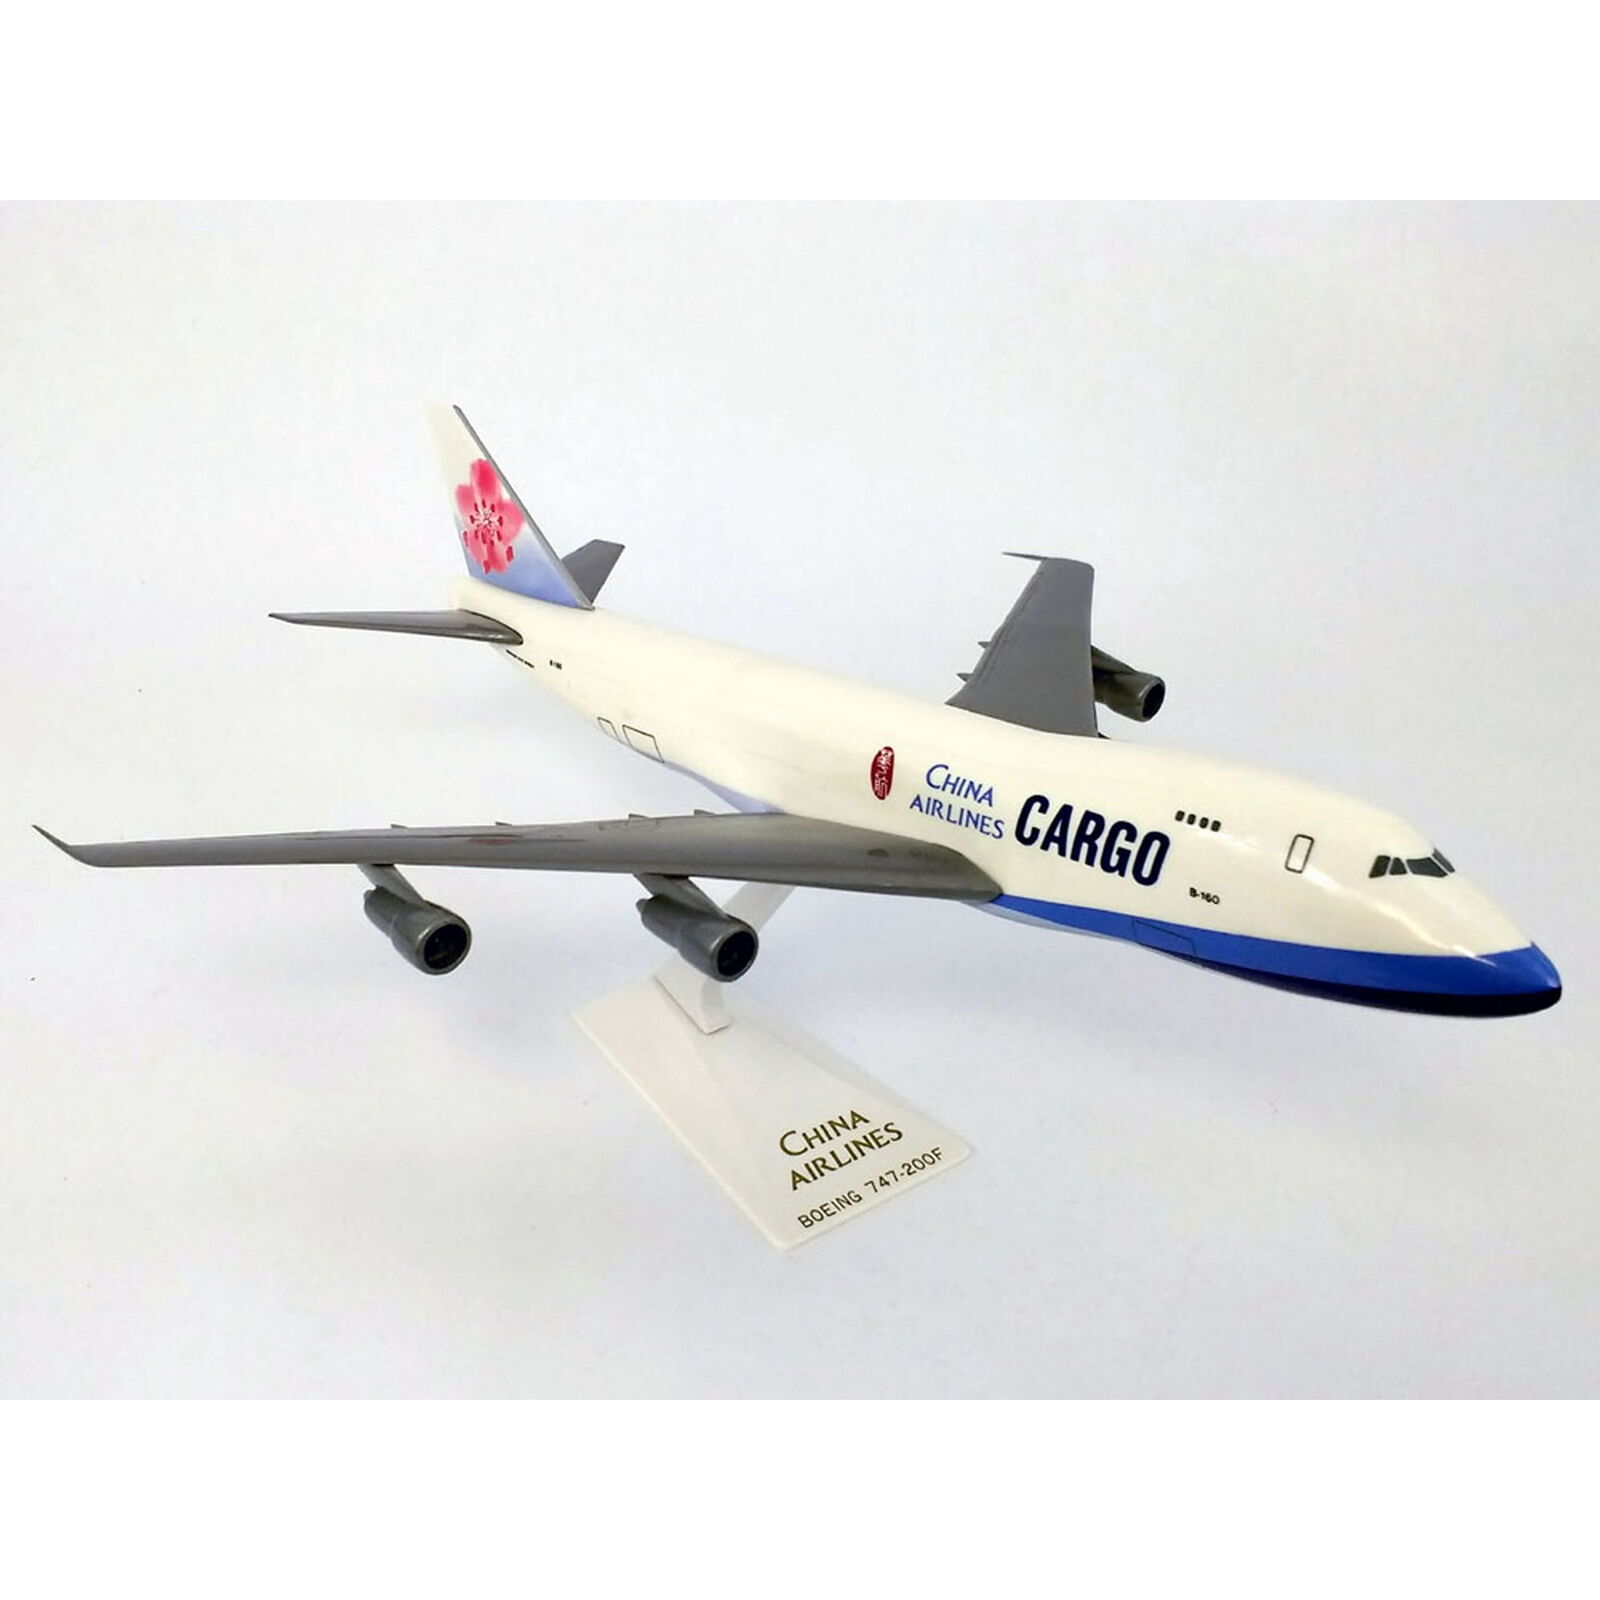 Flight Miniatures China Airlines Cargo Boeing 747-200F Desk 1/250 Model Airplane